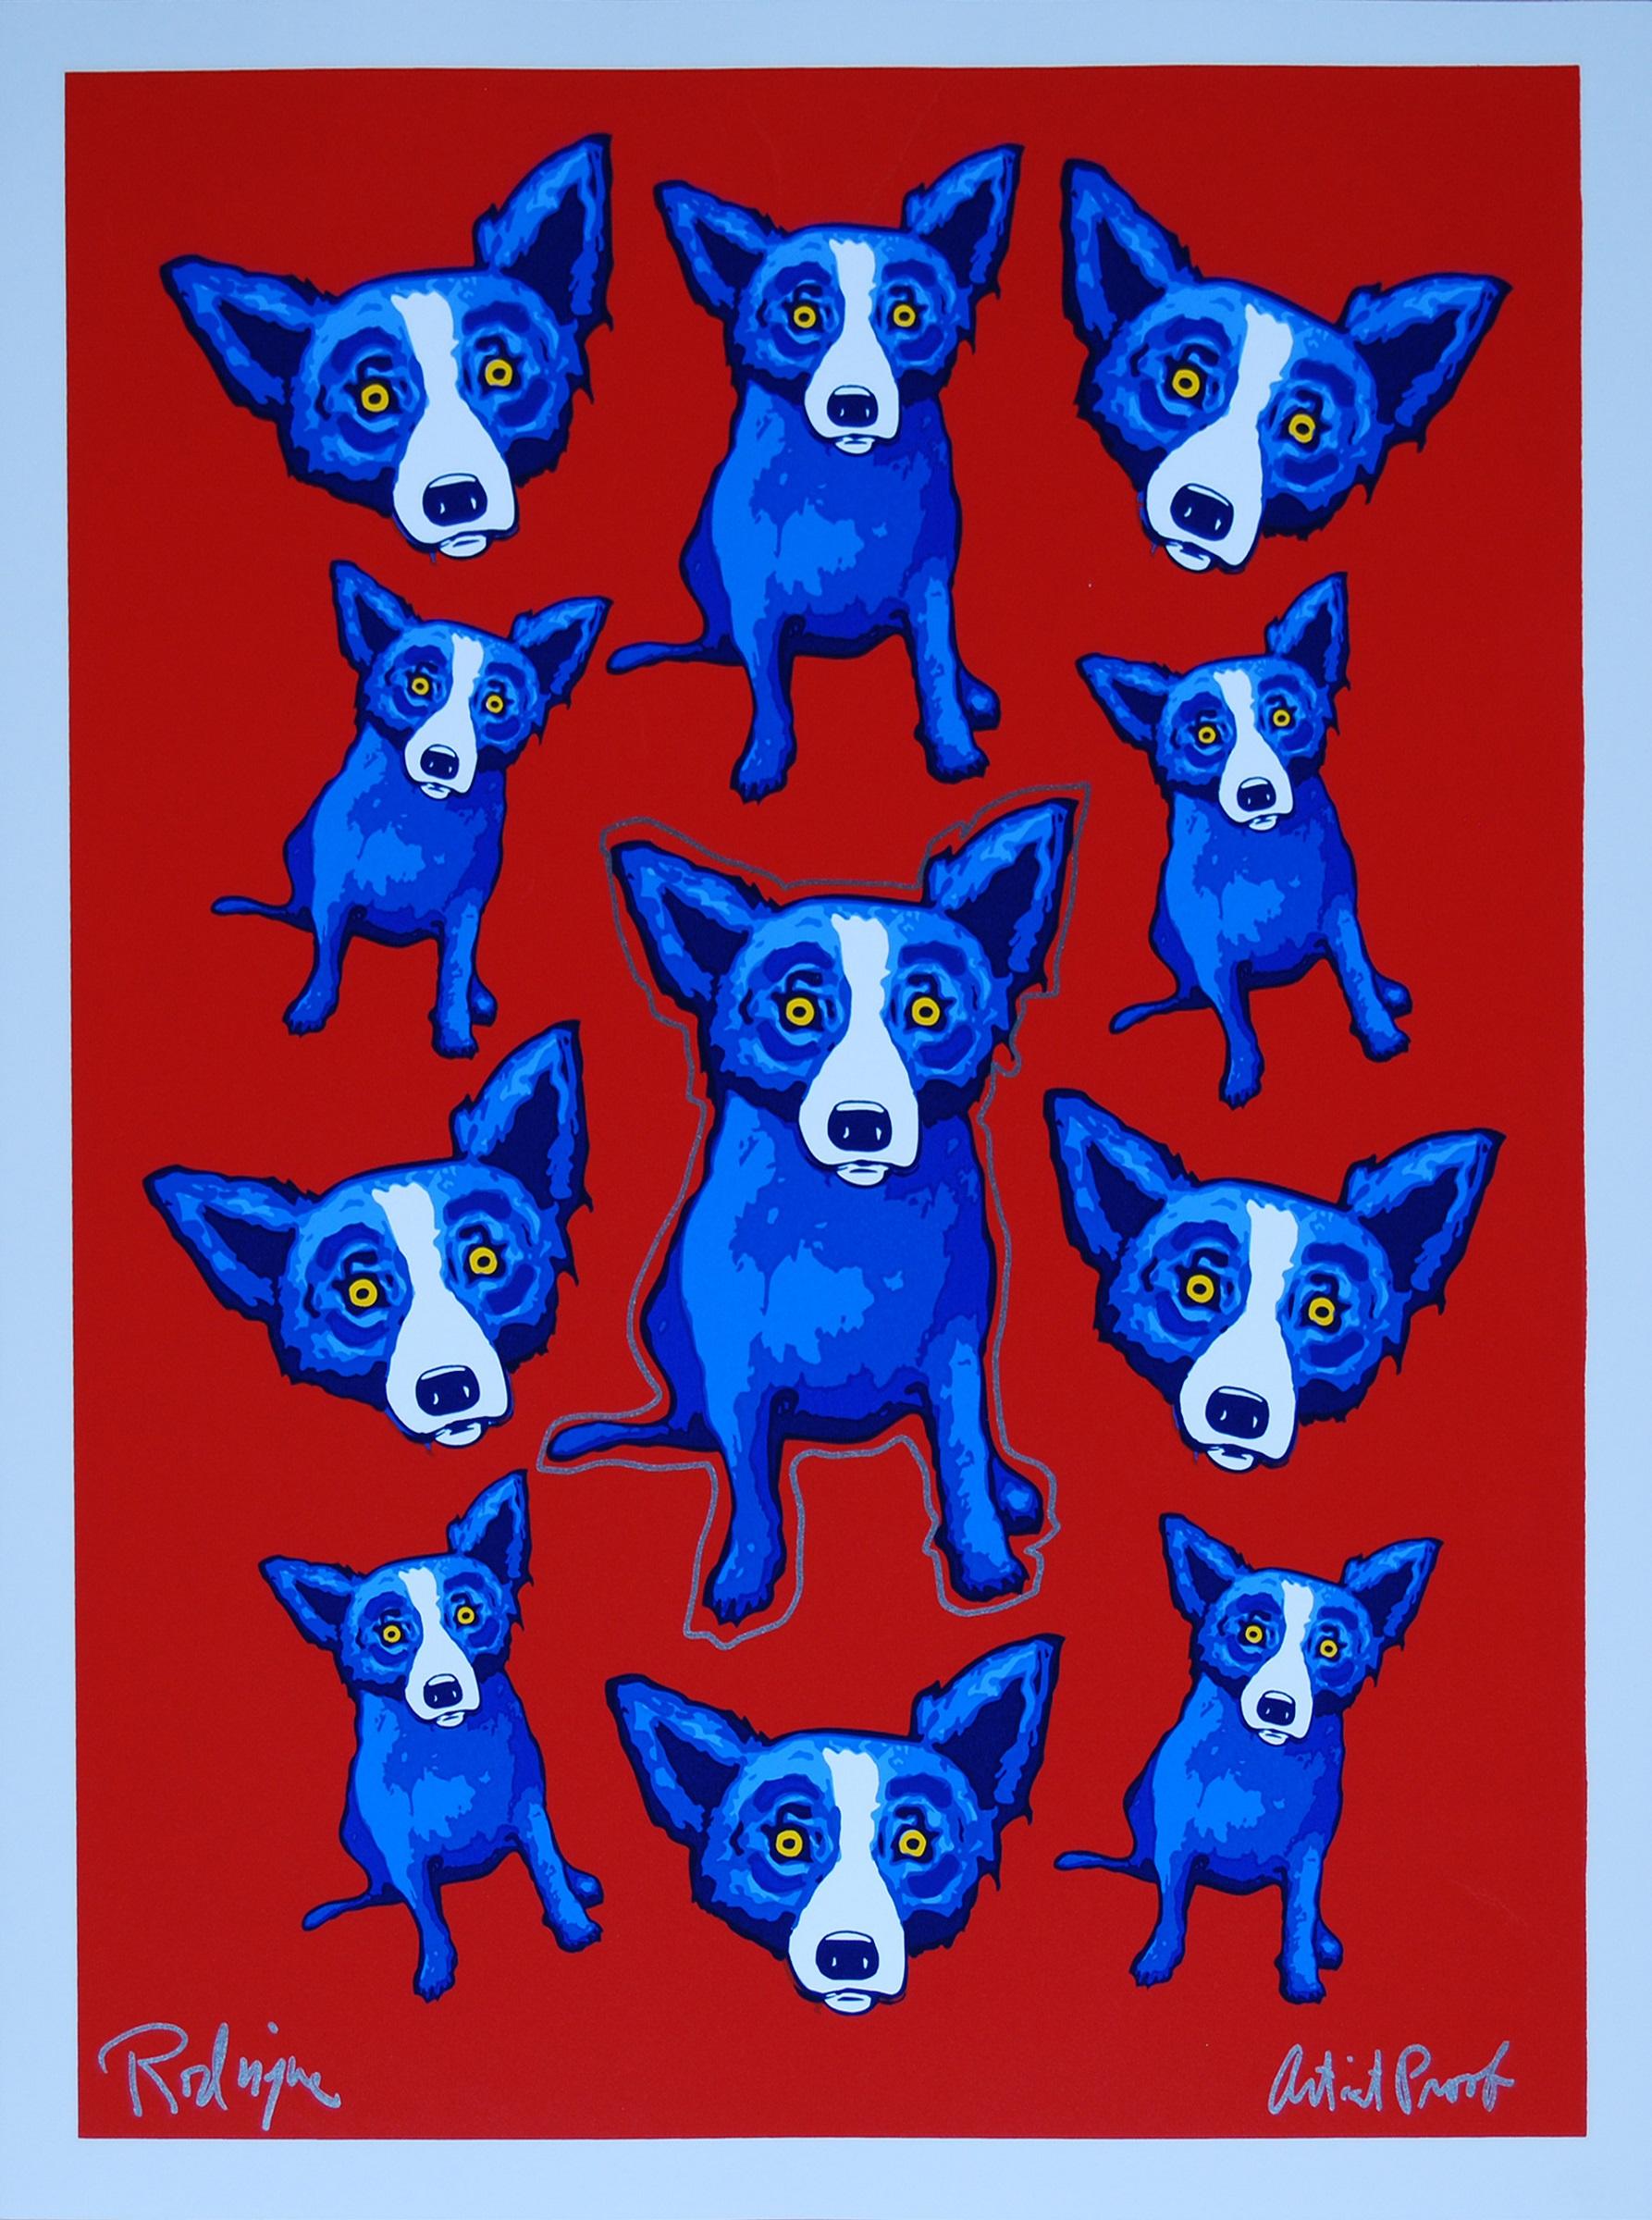 George Rodrigue Animal Print - Original Group Therapy Red - Remarqued Signed Silkscreen Blue Dog Print